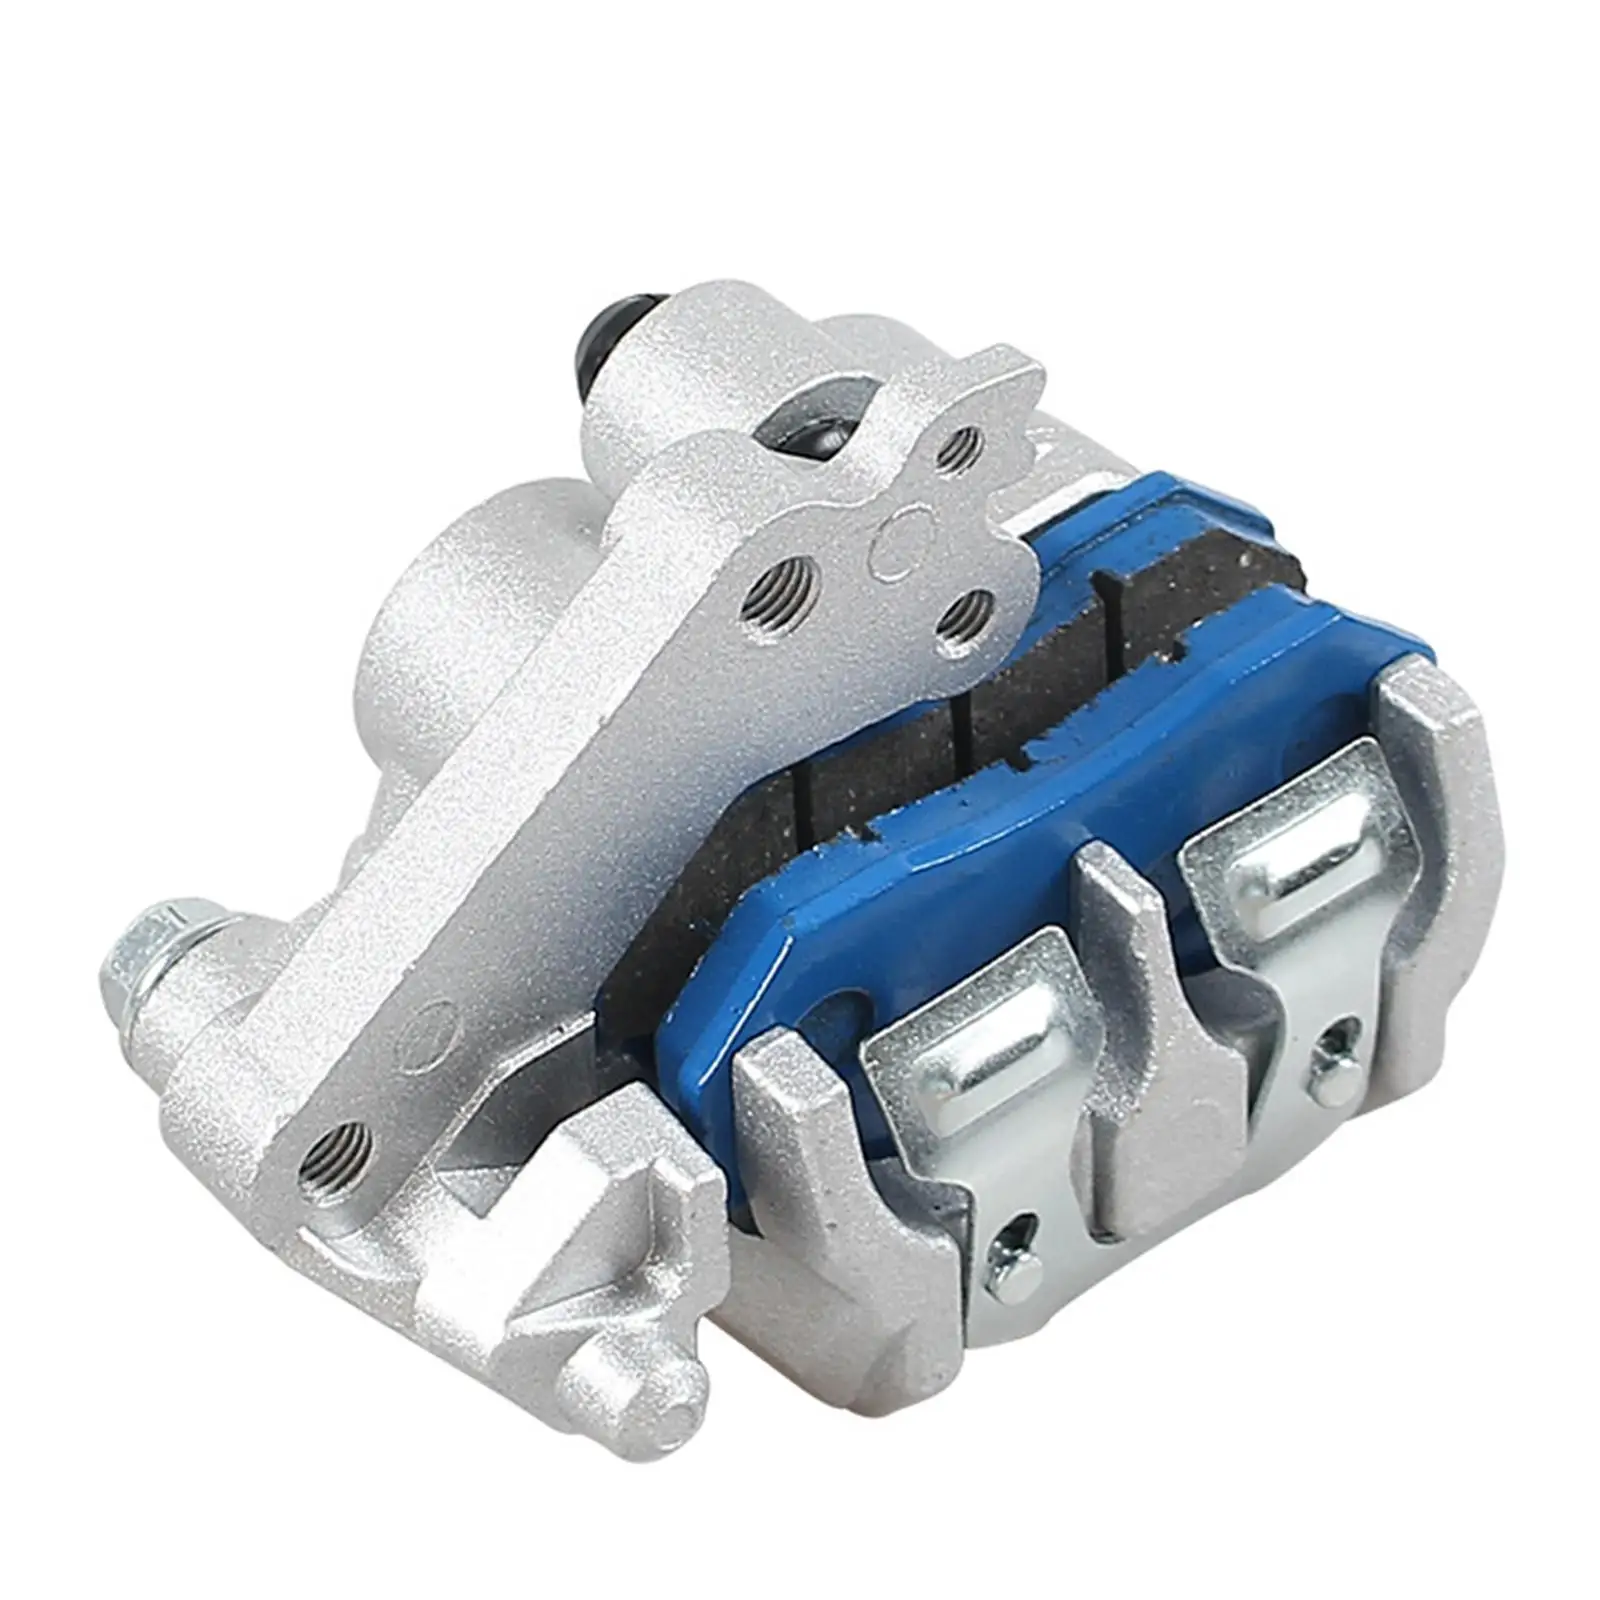 Motorcycle Front Brake Cylinder Caliper for Premium Accessories